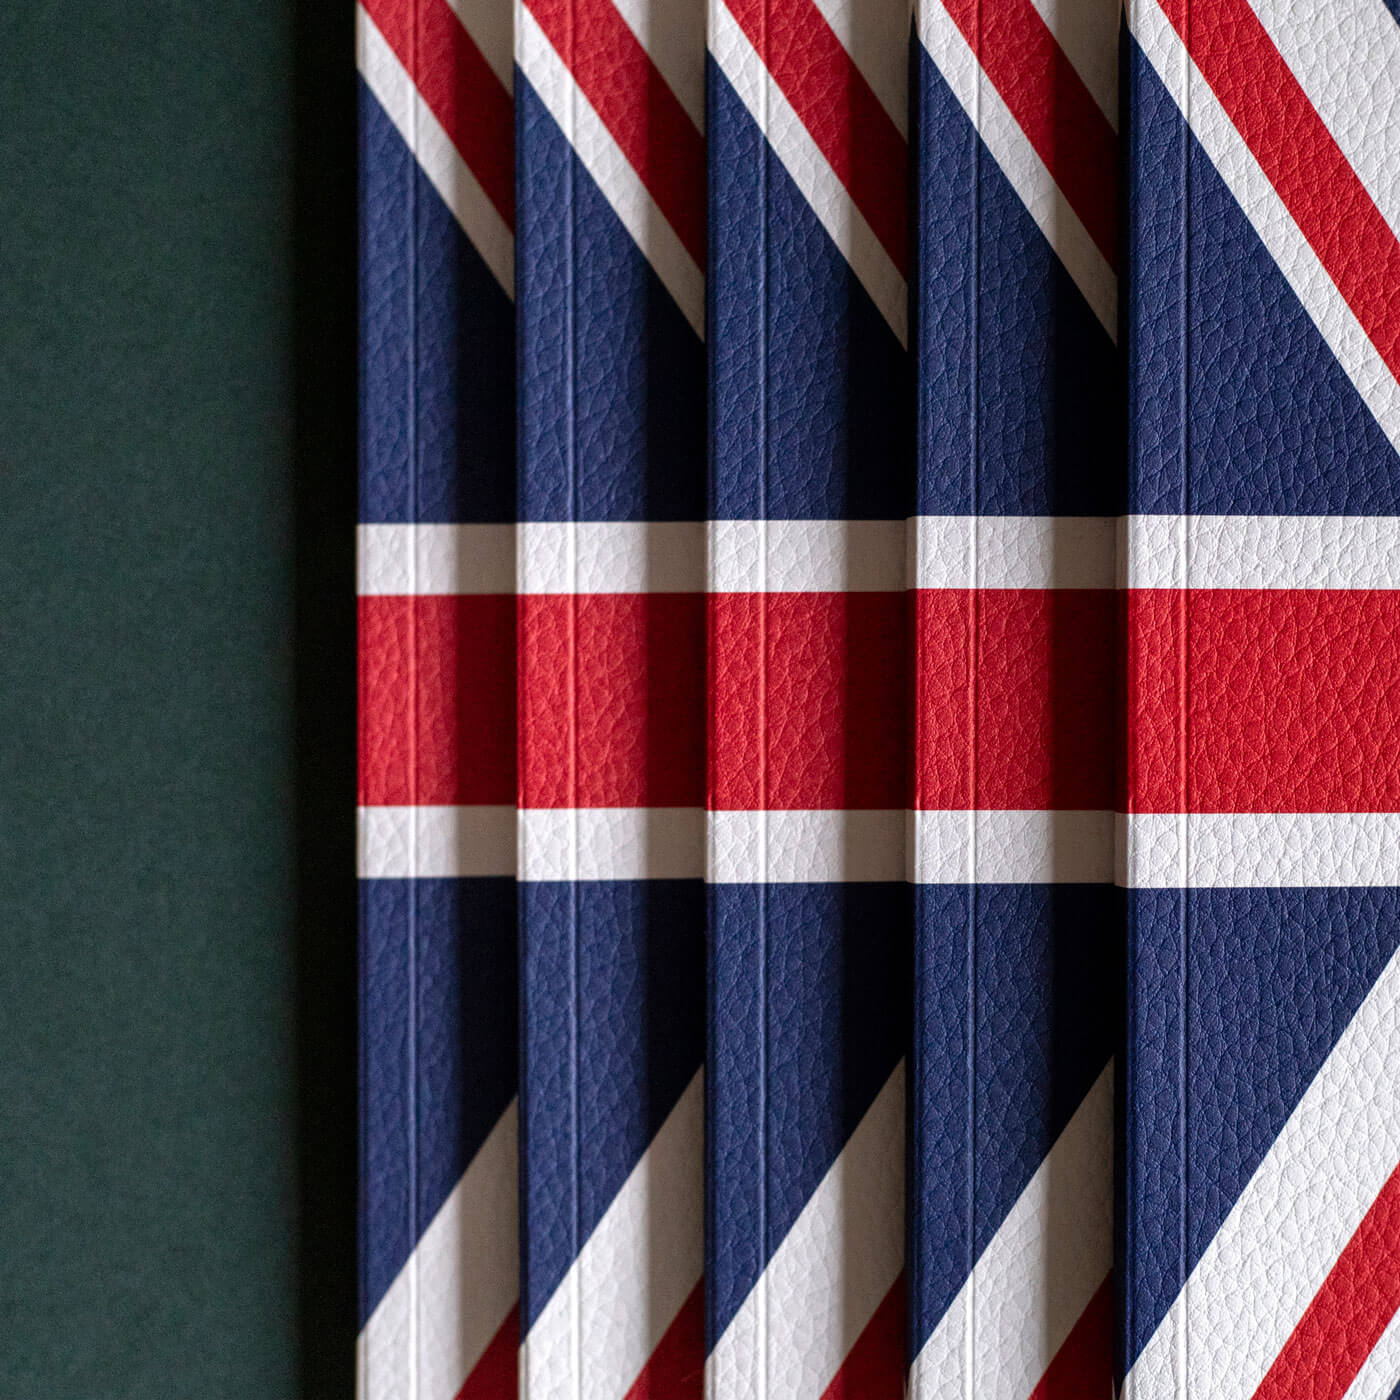 stacked notebooks printed union jack leather looking paper gold engraved